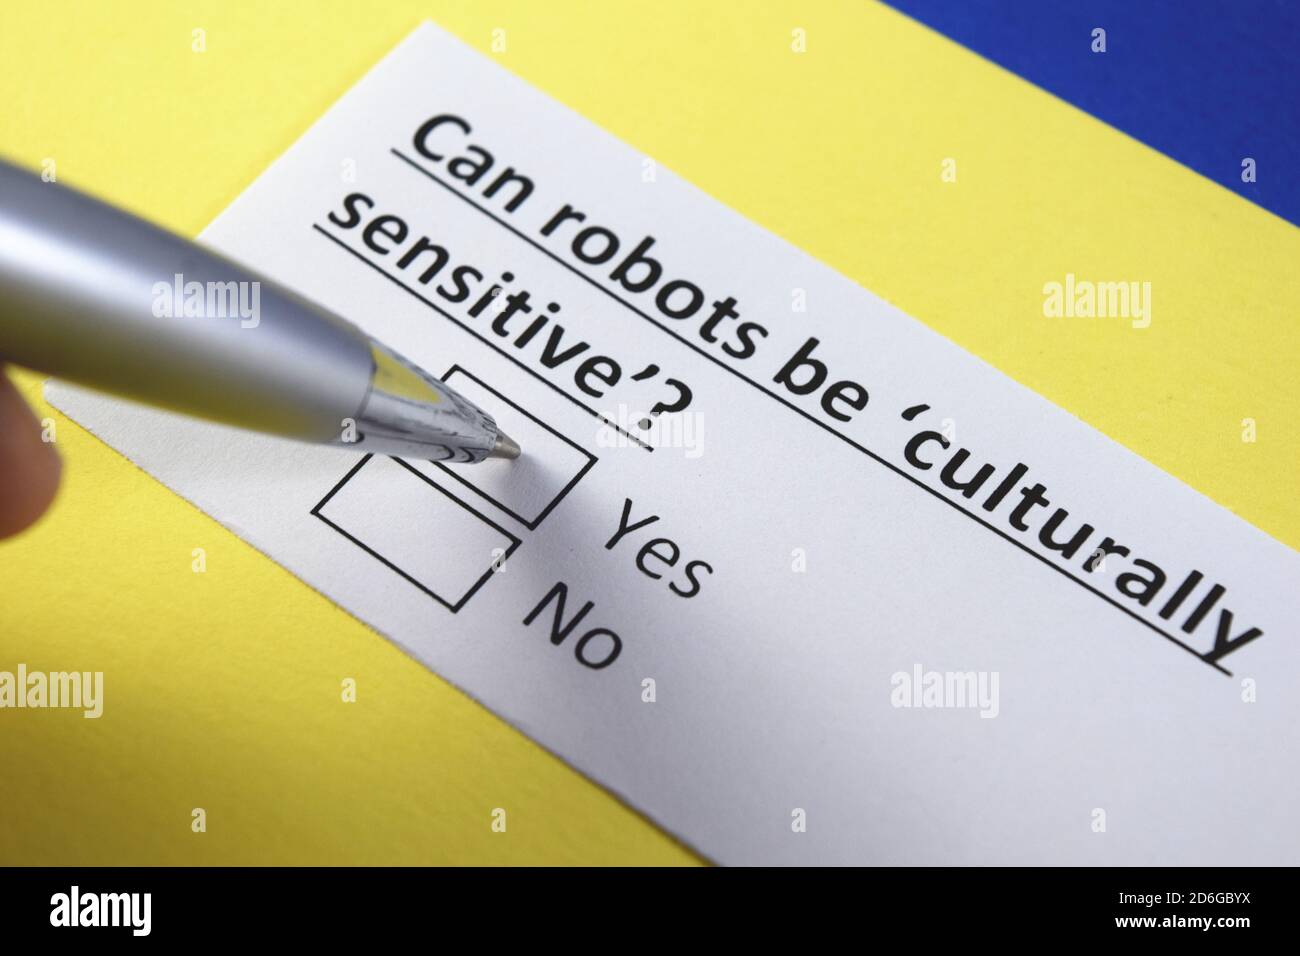 Can robots be 'culturally sensitive'? yes or no? Stock Photo